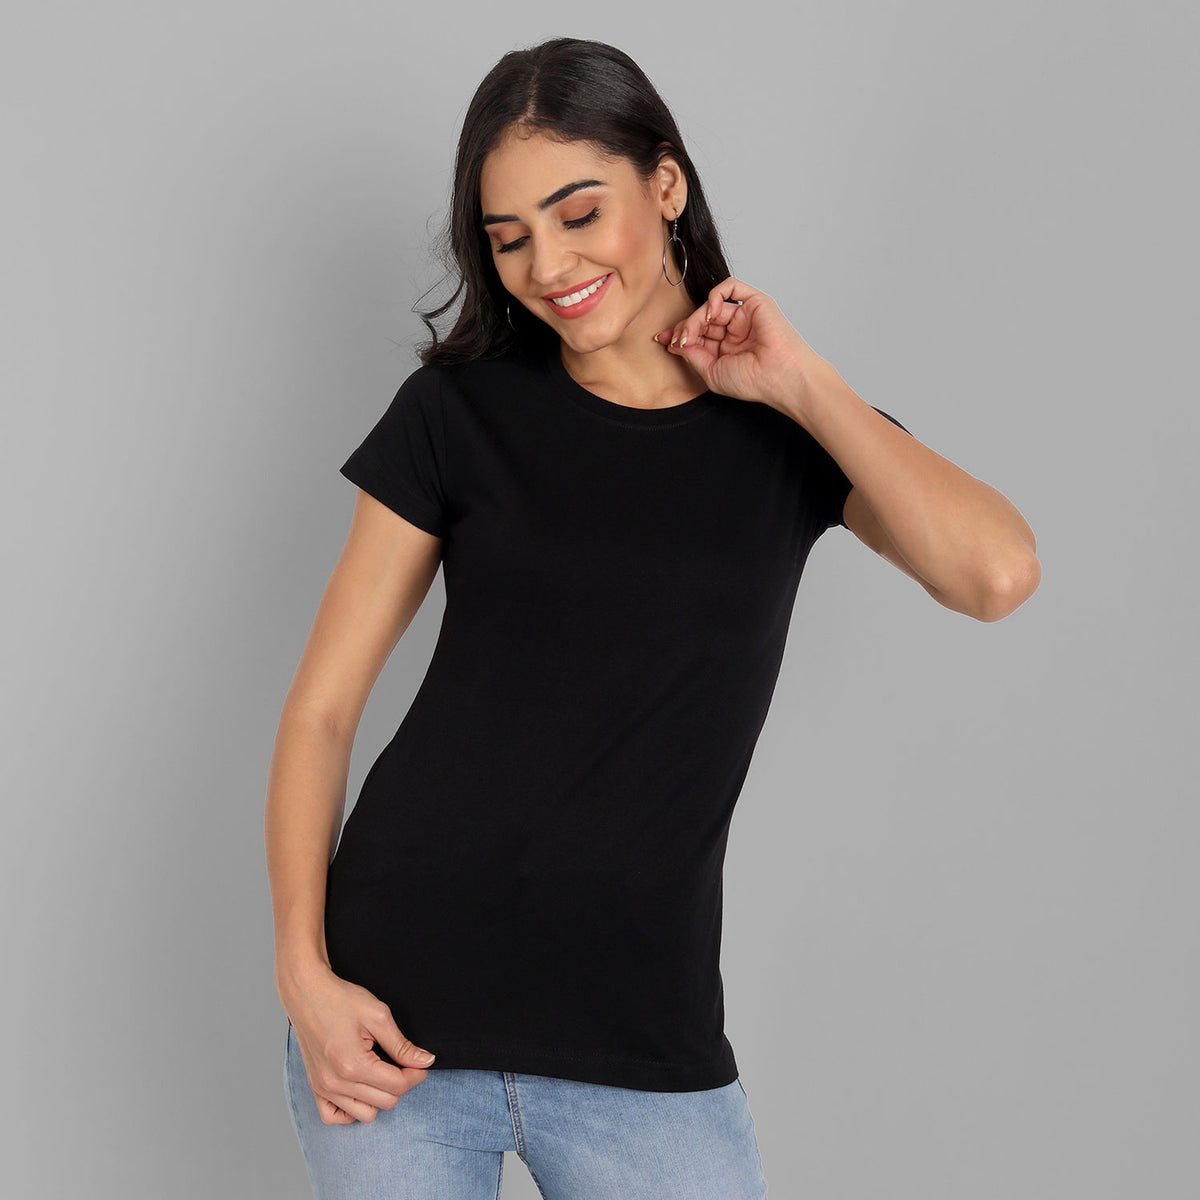 Life Partner Half Sleeve Women's Long T-Shirts with Pocket and Side Slits  at Rs 385/piece in Ahmedabad